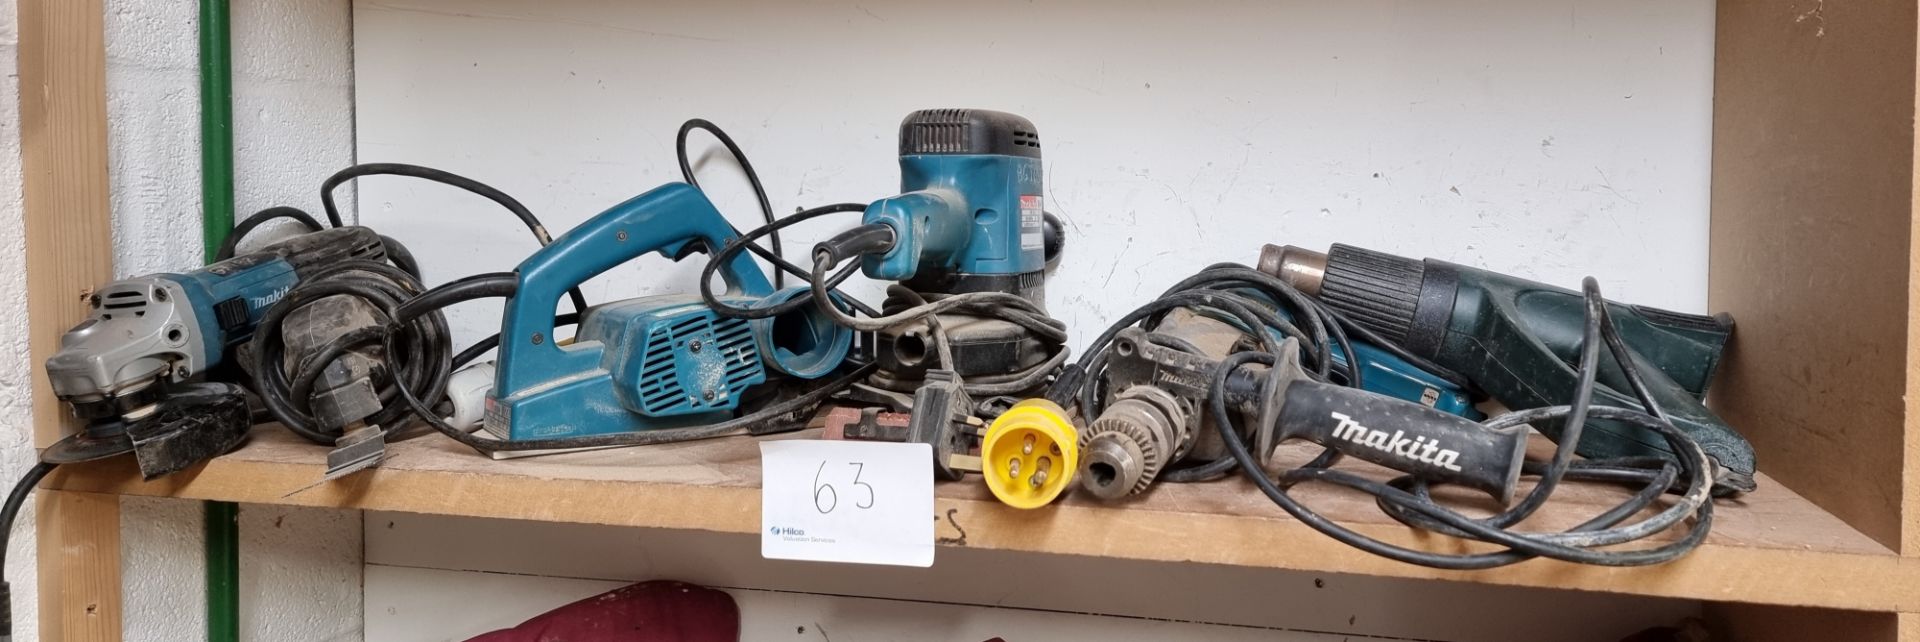 Contents of Shelf to include: various electrical power tools - Makita and Metabo